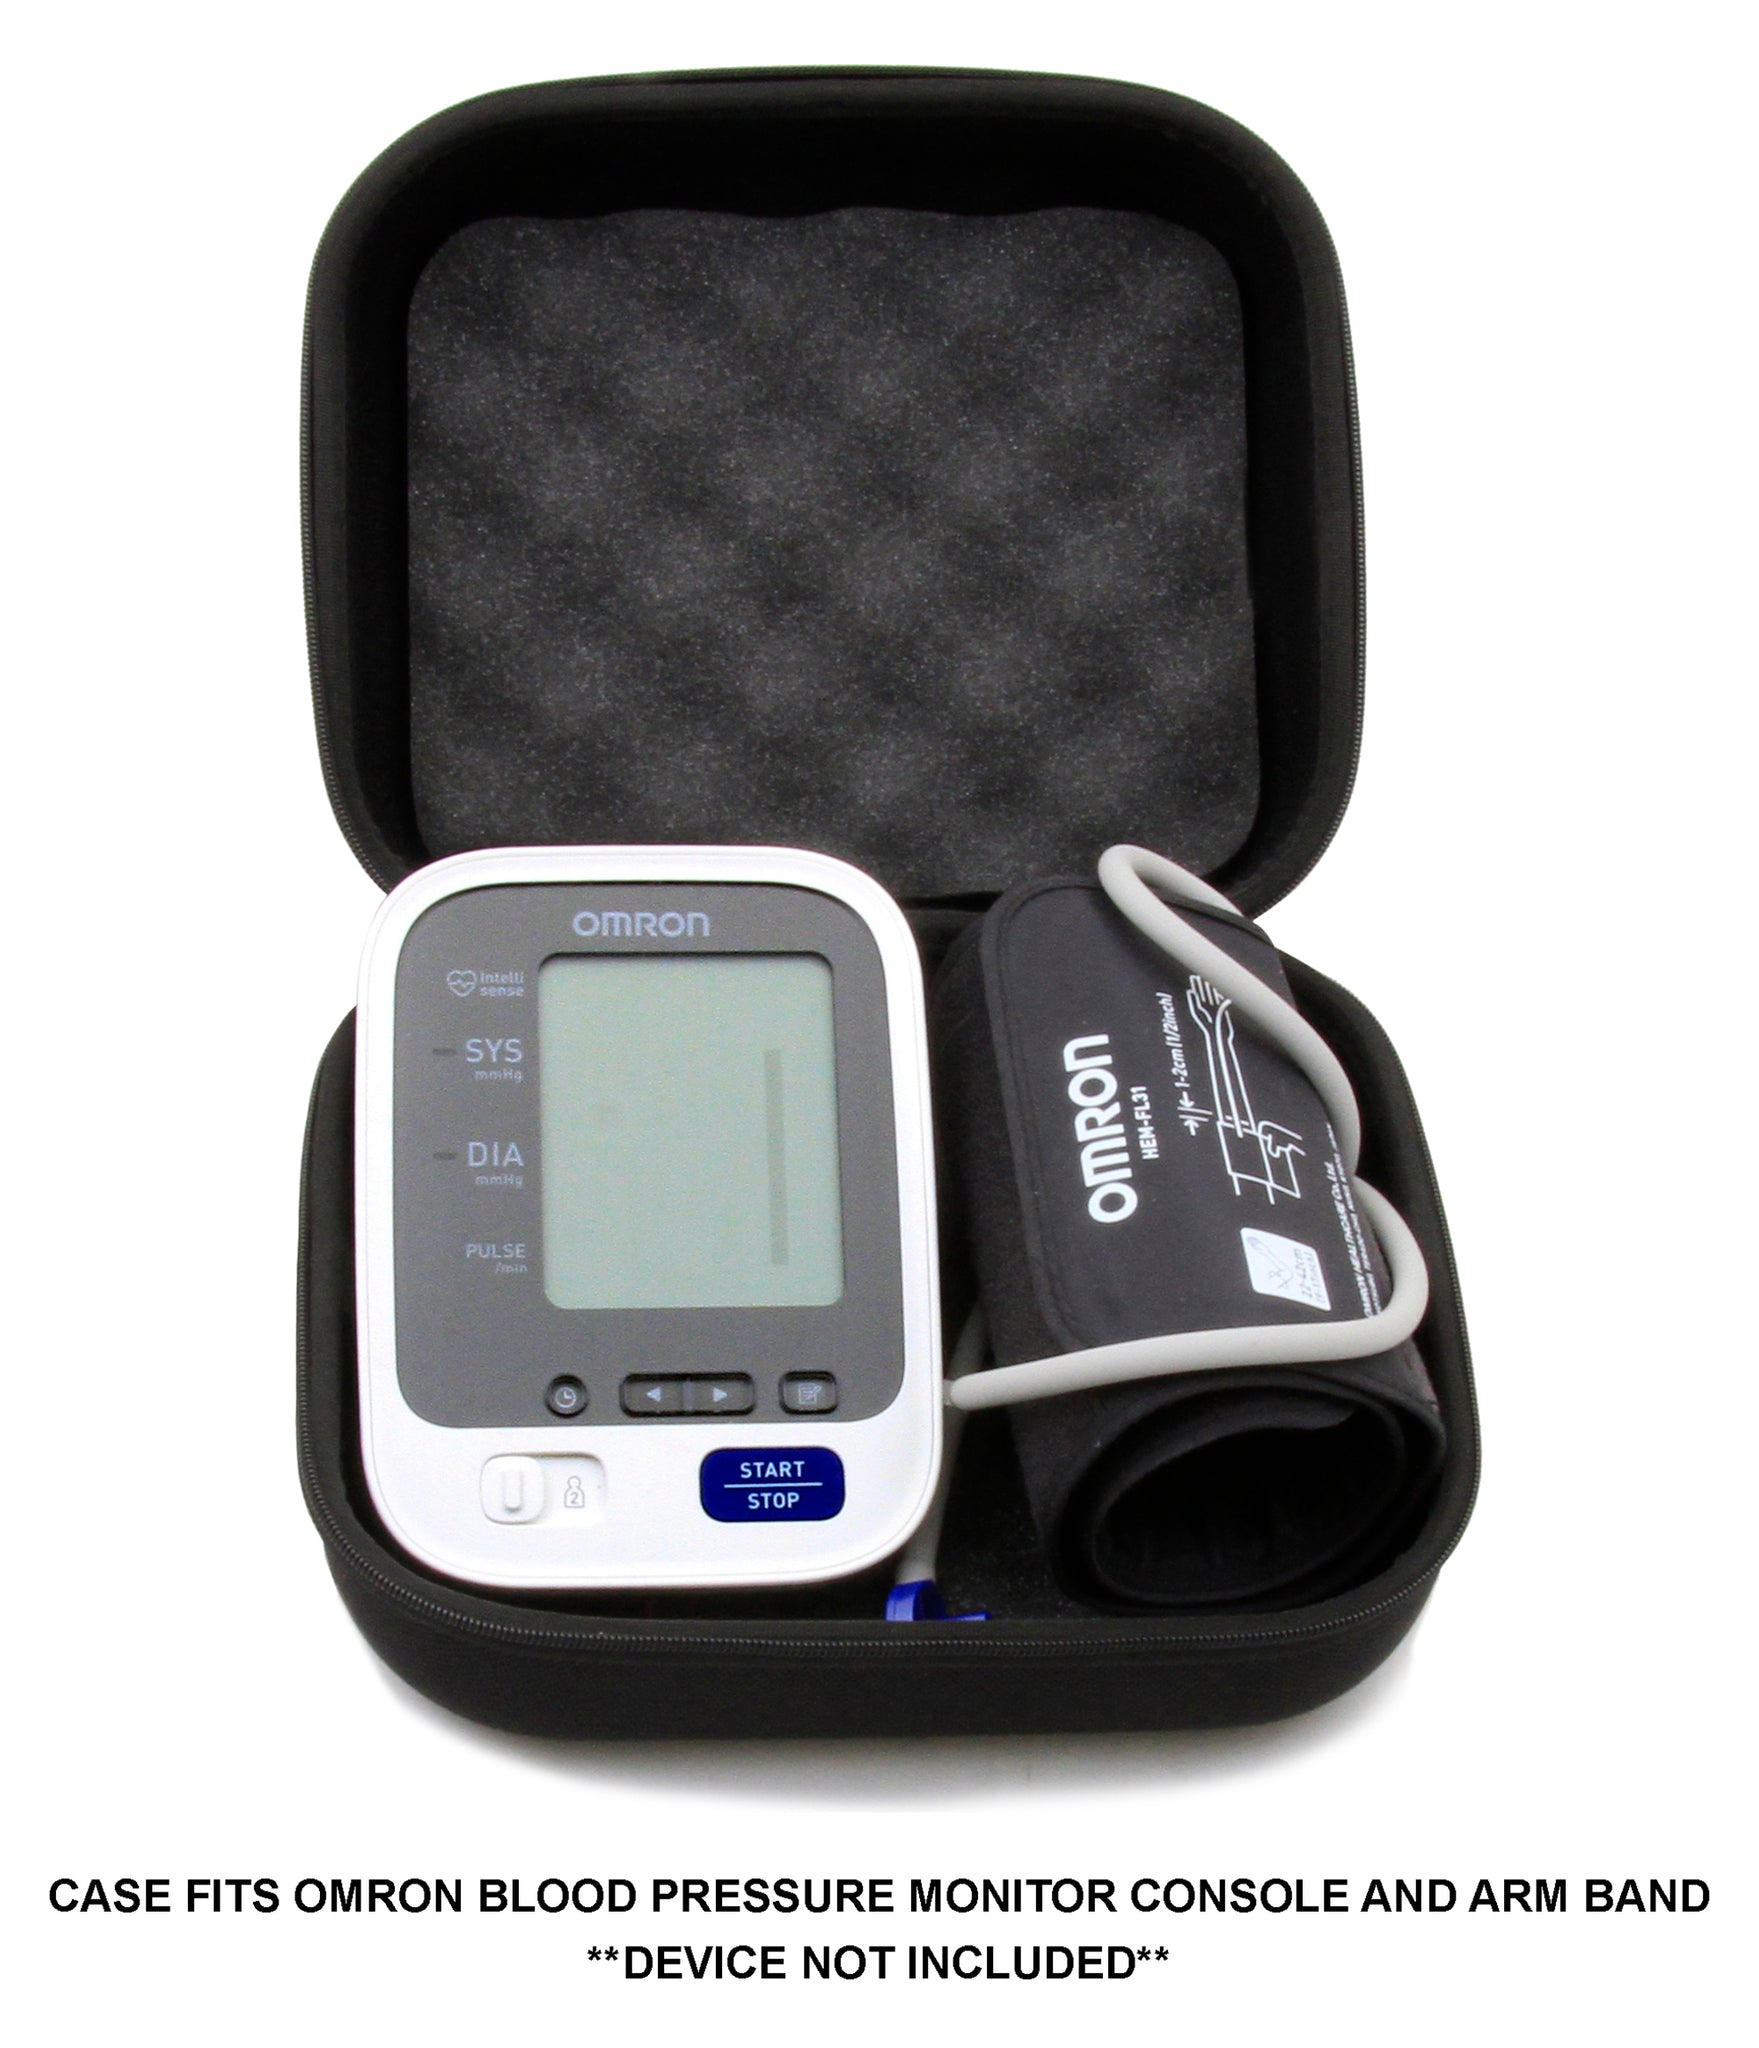 Omron 7 Series Upper Arm Blood Pressure Monitor With Cuff - Fits